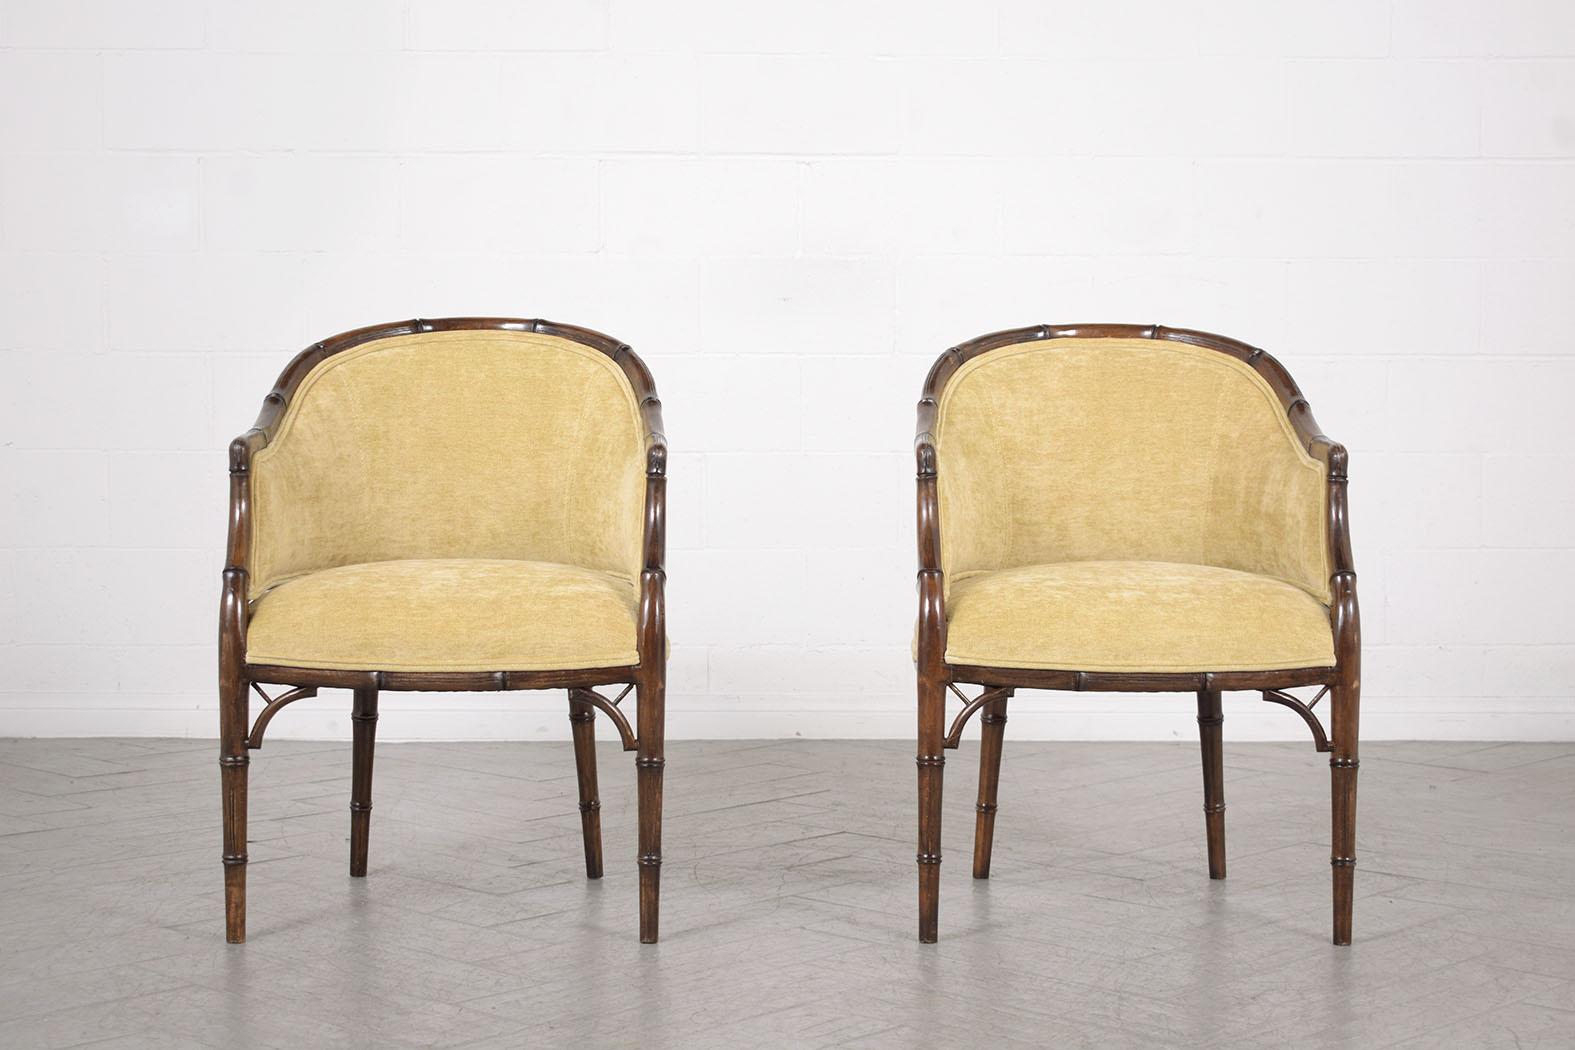 Vintage Hollywood Regency Velvet Armchairs with Bamboo-Carved Frame In Good Condition For Sale In Los Angeles, CA